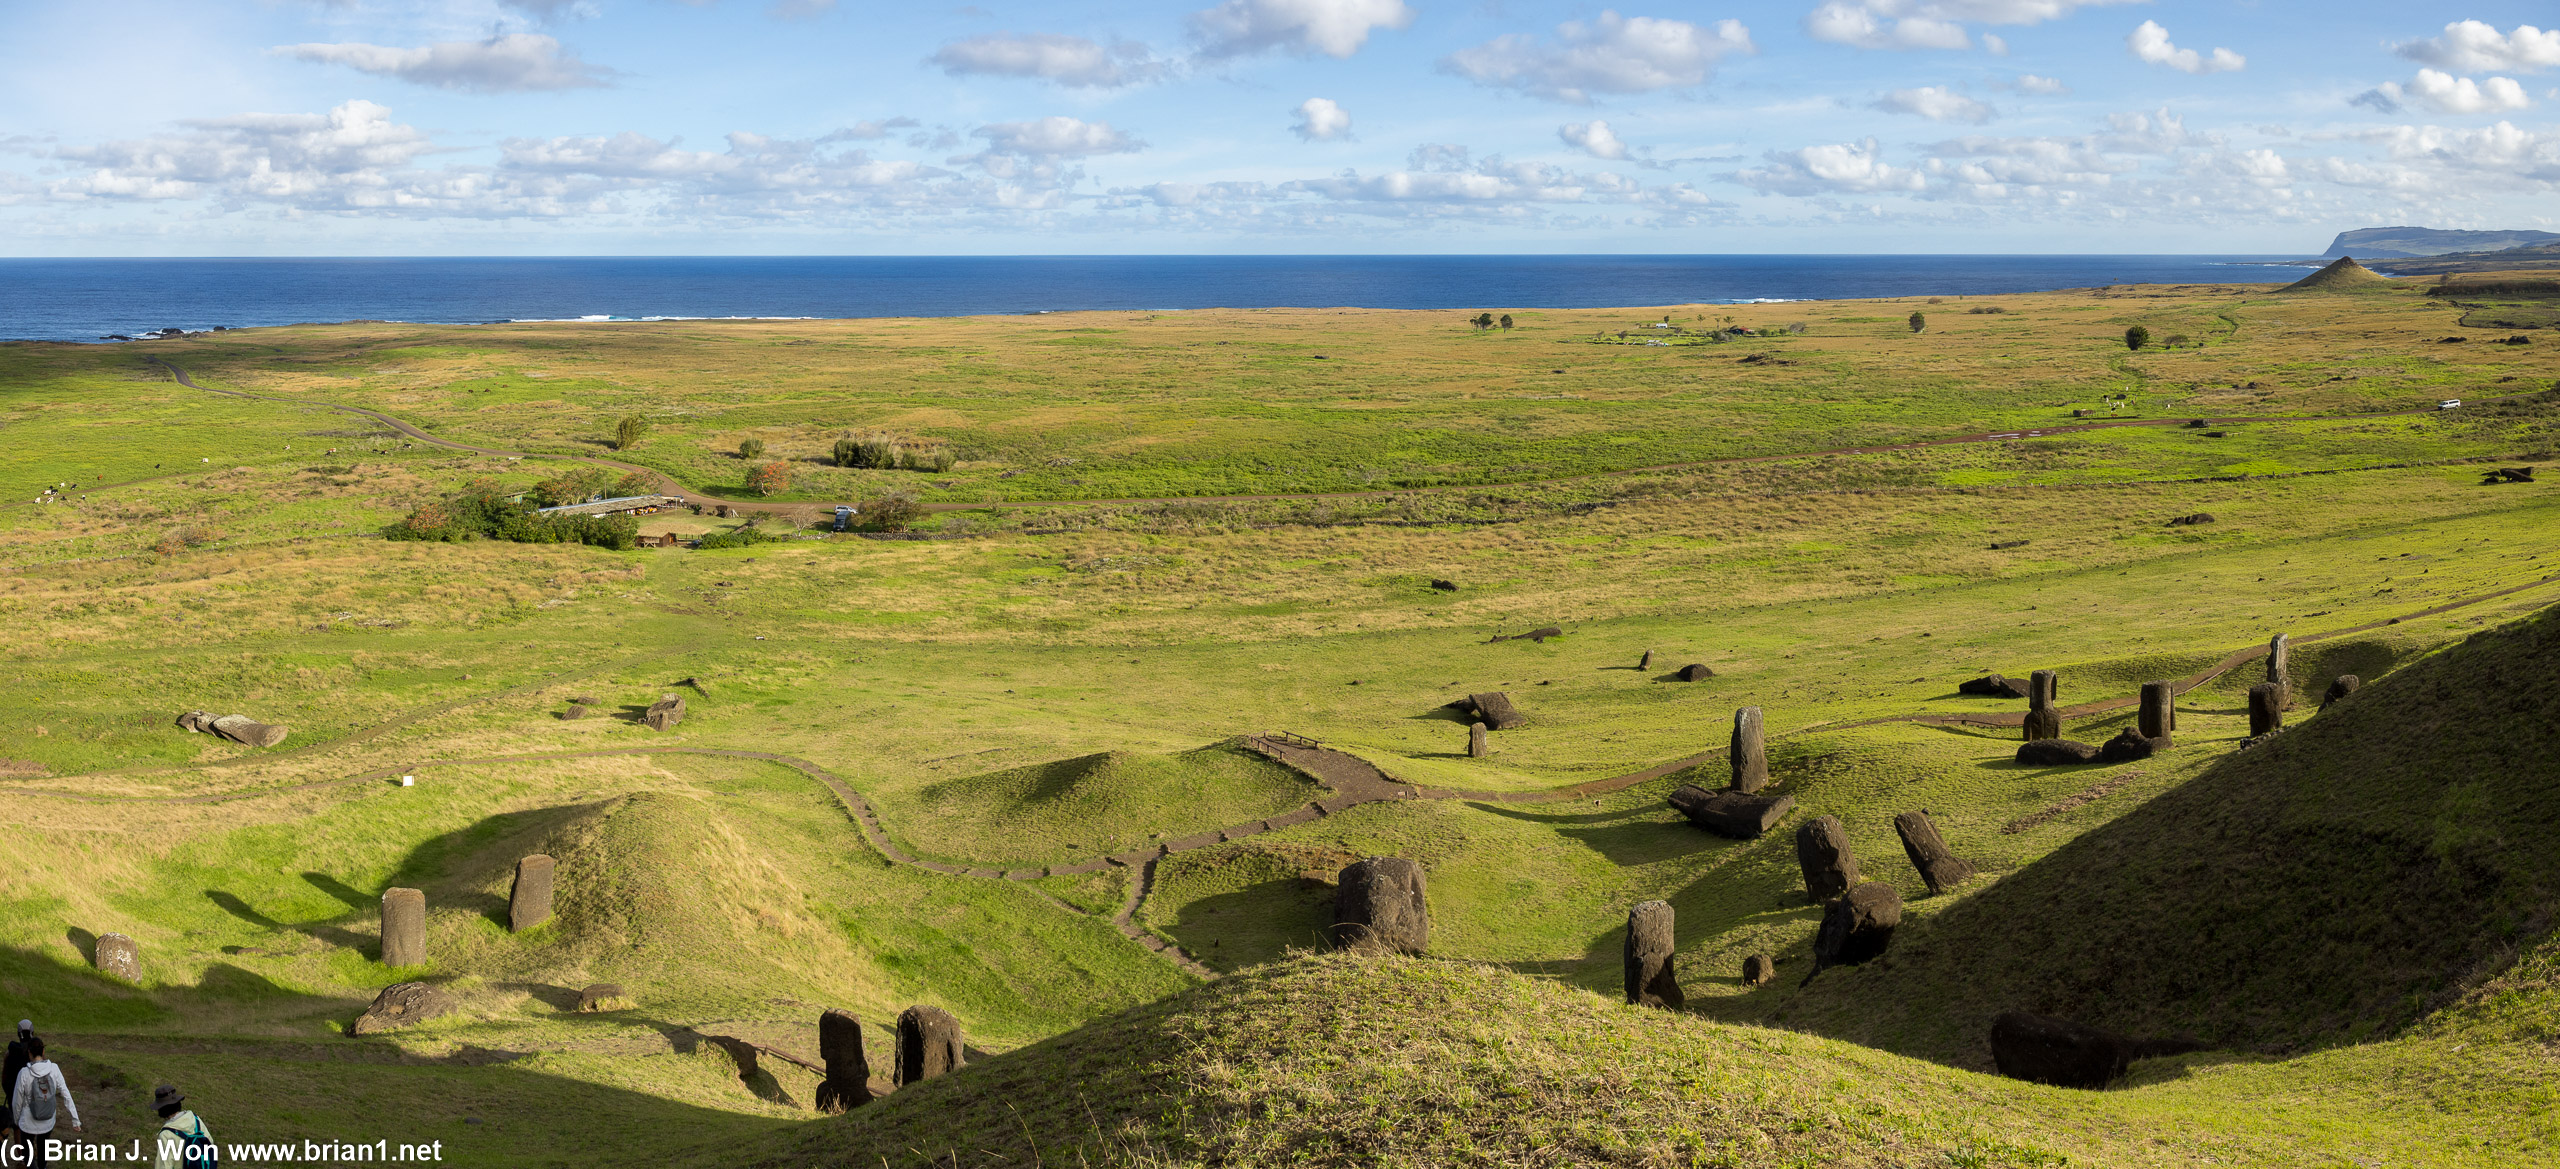 Many moai did not make it to their destinations.